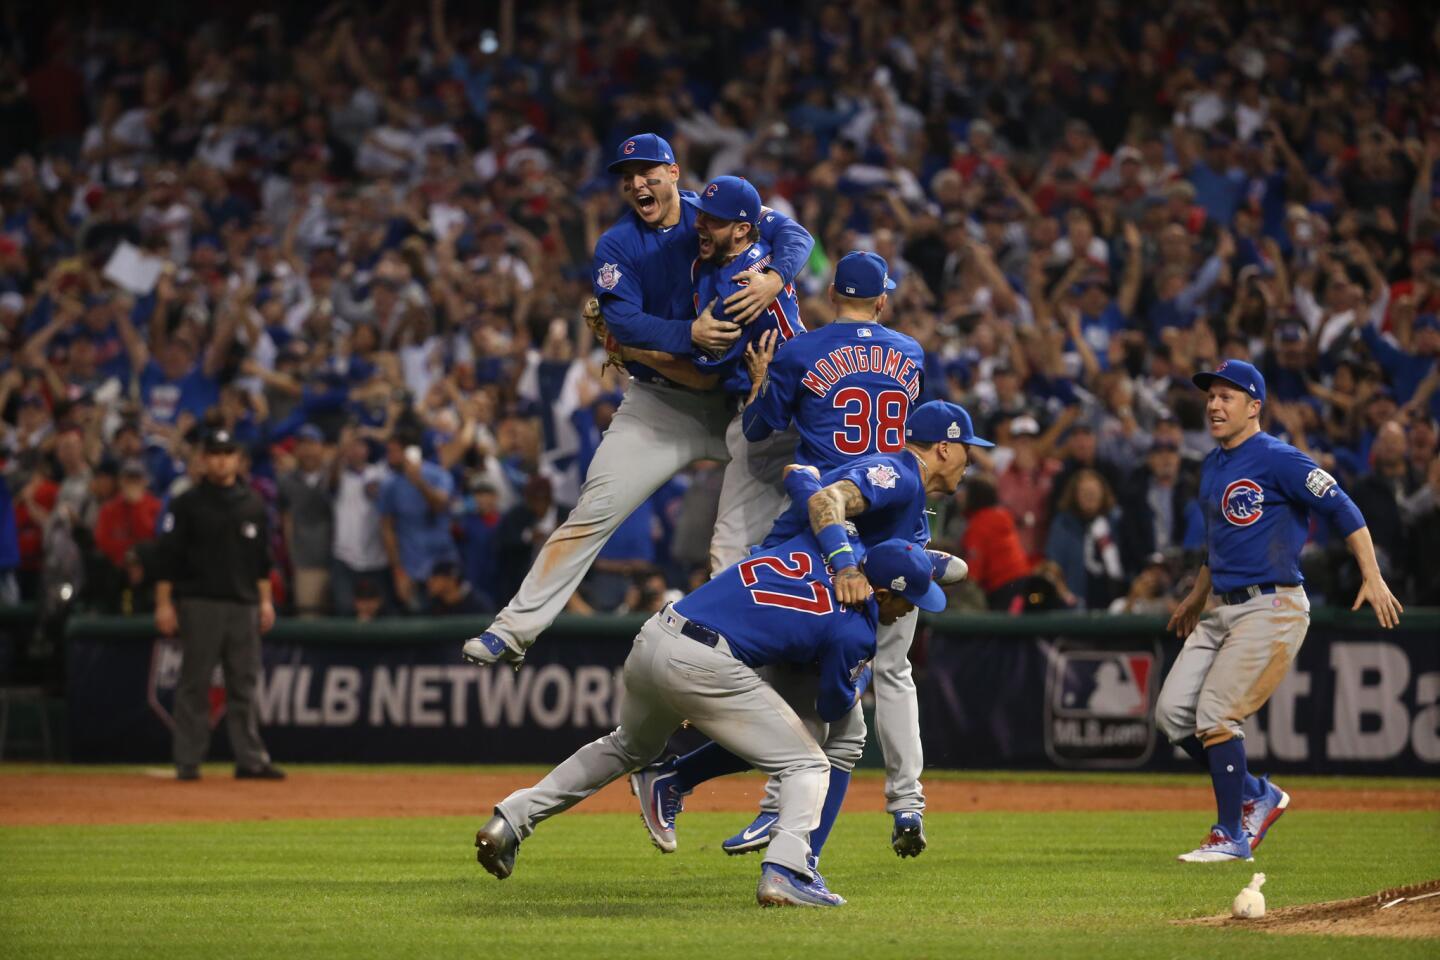 The Chicago Cubs celebrate after beating the Cleveland Indians on Nov. 3 in Game 7 to win the World Series at Progressive Field in Cleveland.